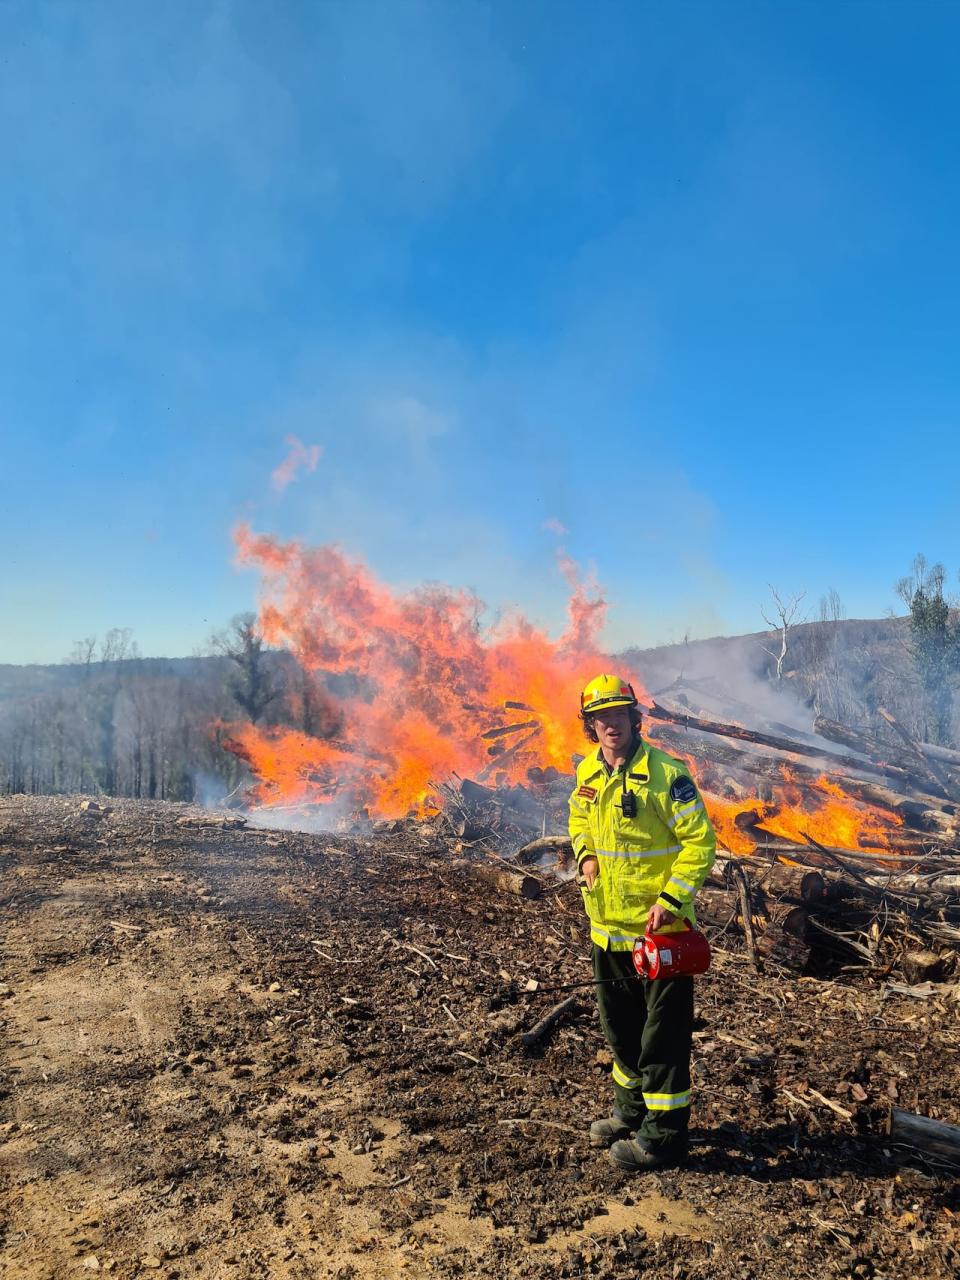 Donald Warren wanted to be a part of Ontario's forest firefighting crews this year. Although he previously worked as a crew leader, he was ready to take on a crew member role. He says his attempts to get answers from the MNRF went nowhere.